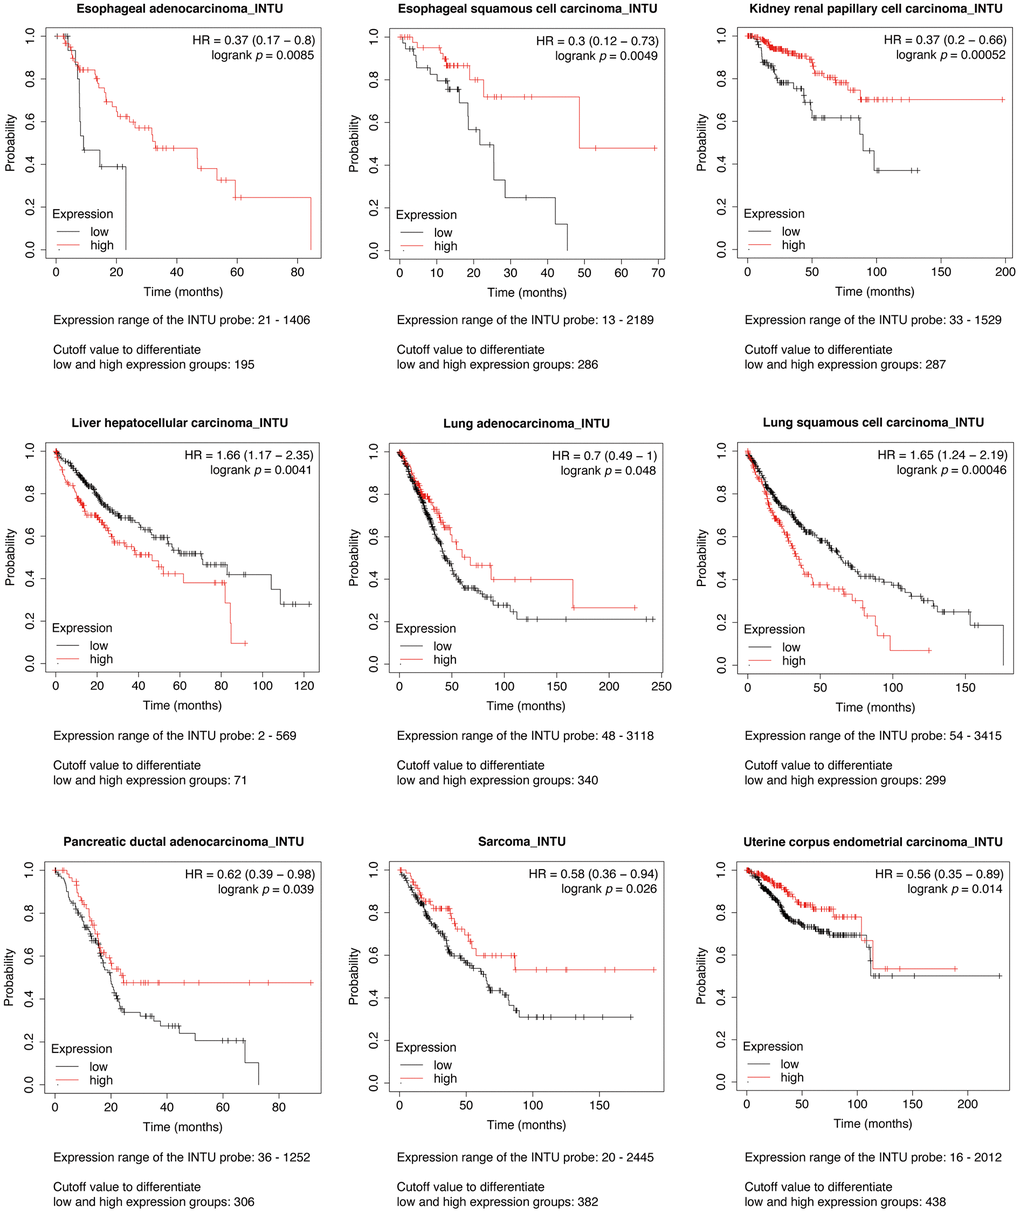 Evaluation of the prognostic significance of INTU mRNA level in different cancer types. Pan-cancer survival analysis was carried out to determine the relationship between INTU mRNA level and OS probabilities in 21 different types of cancer. Decreased INTU expression was found associated with poor prognosis in EAC, ESCC, KIRP, LUAD, PDAC, SARC and UCEC patients, whilst high level of INTU correlated with poor prognosis in LIHC and LUSC patients.